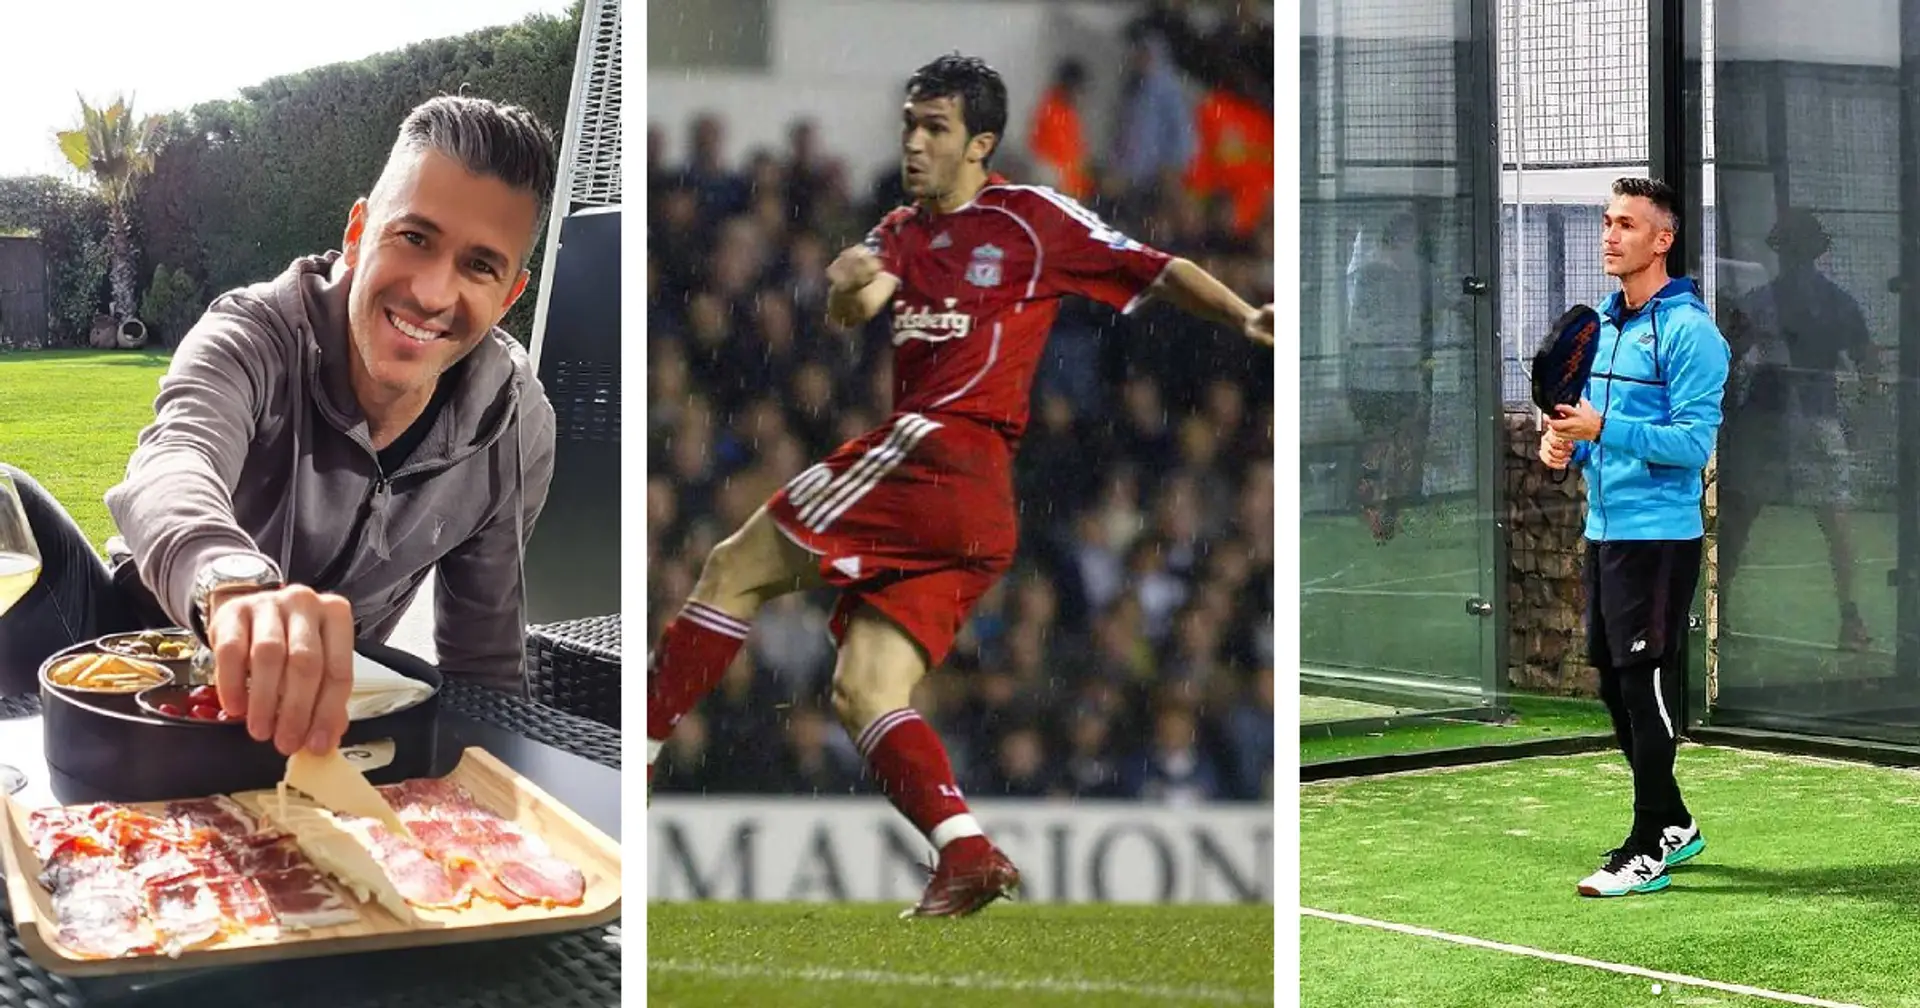 Following Liverpool, trying new sports: What Reds hero Luis Garcia has been up to lately